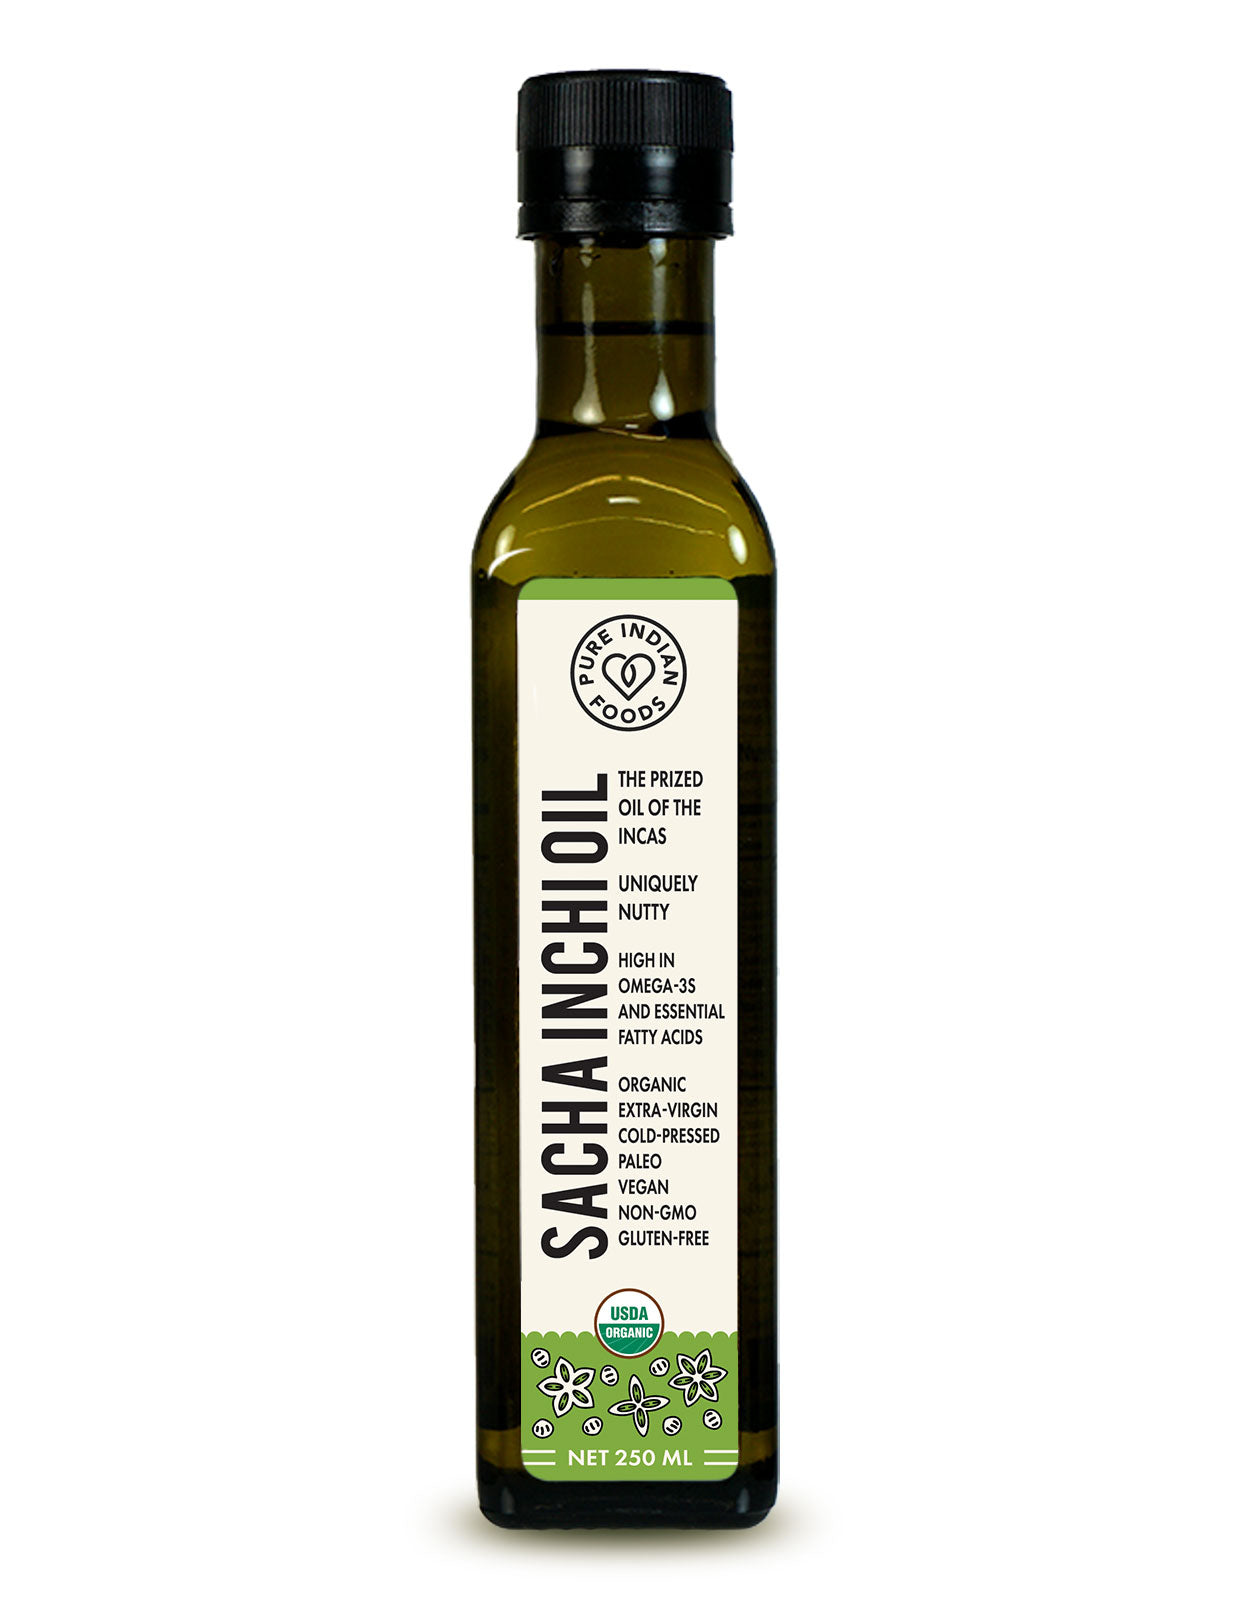 1 bottle of pure indian foods organic sacha inchi oil